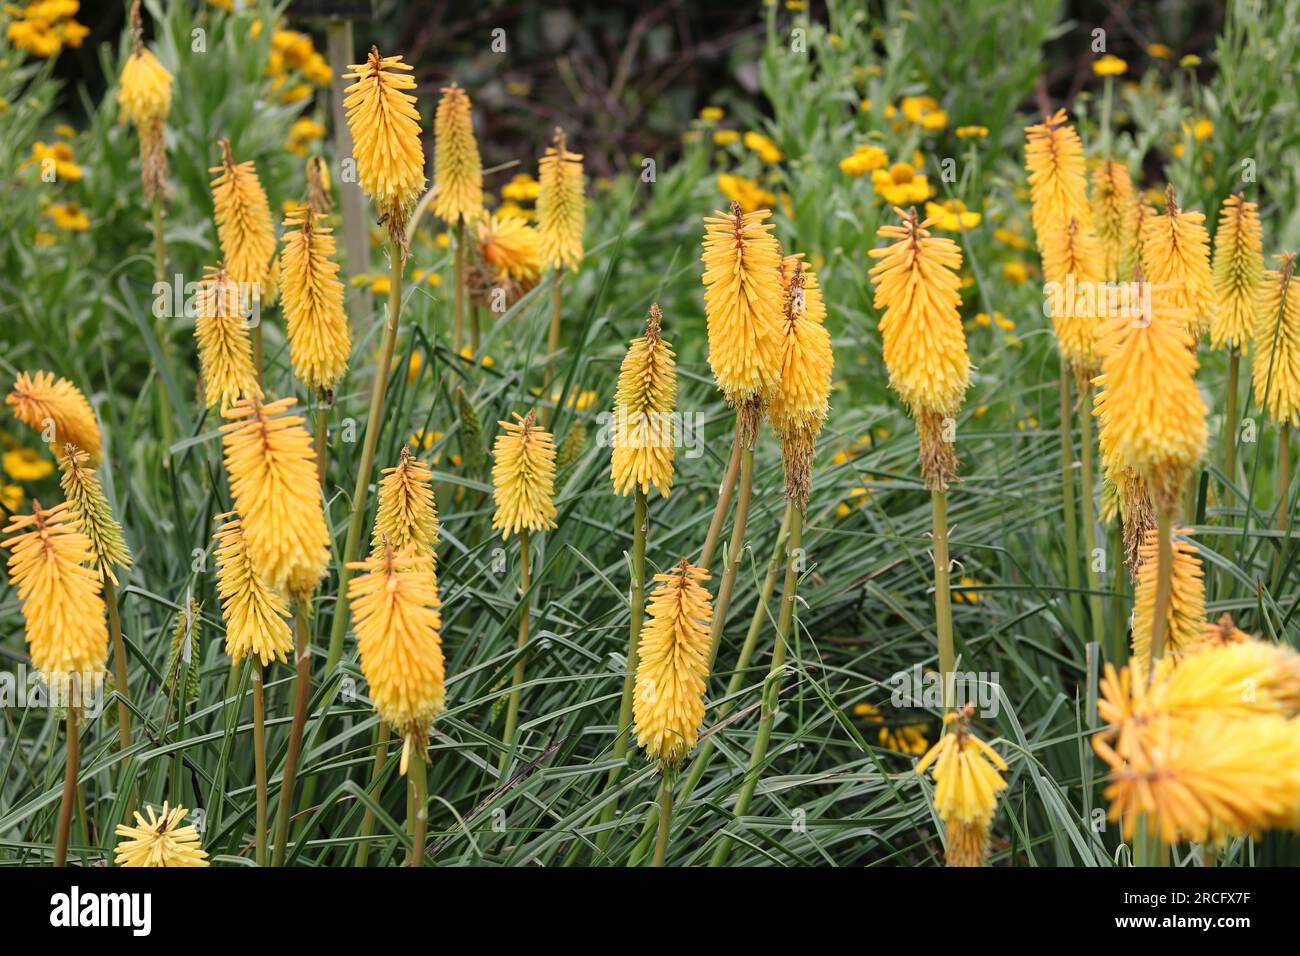 Flowerbed of pale orange red hot pokers or kniphofia in garden Stock Photo